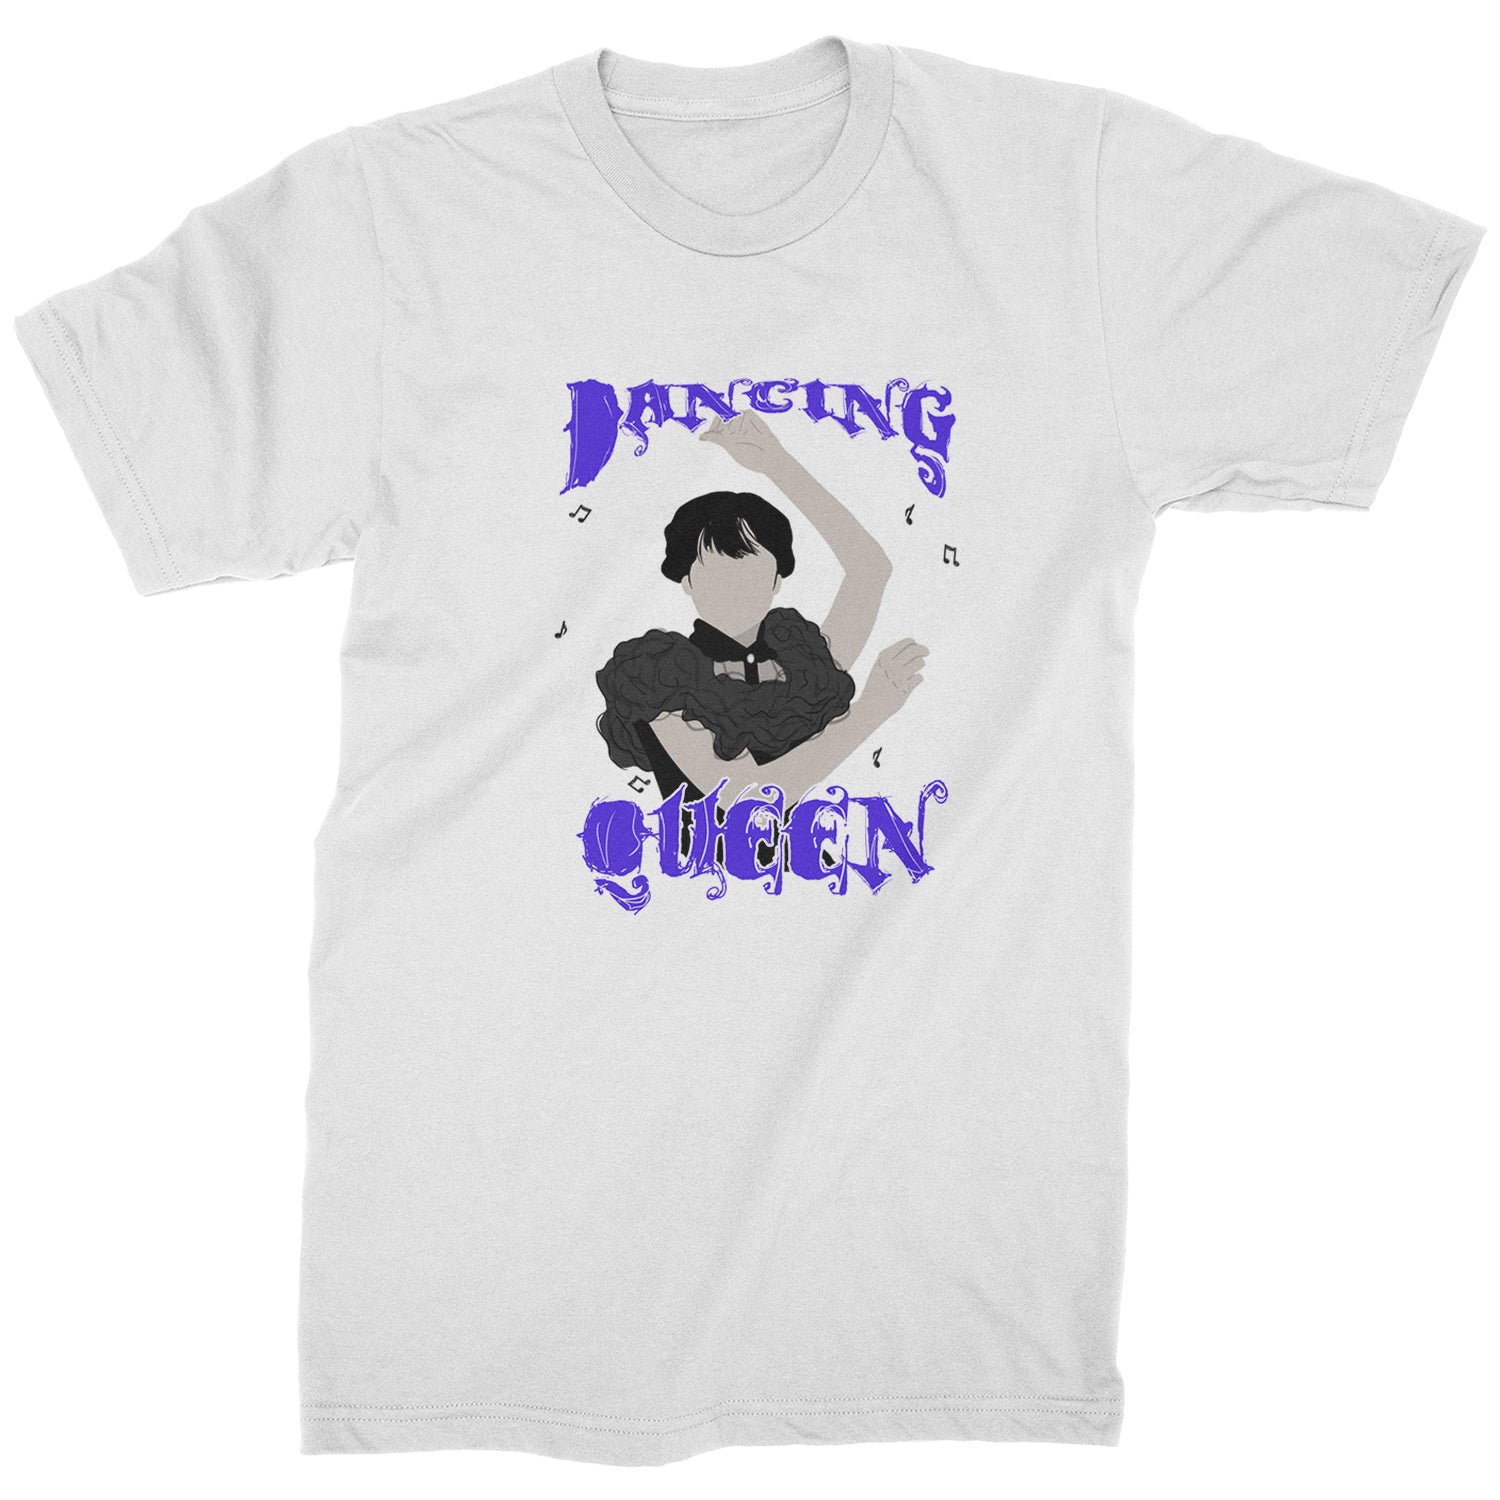 Wednesday Dancing Queen Mens T-shirt black, On, we, wear, wednesdays by Expression Tees